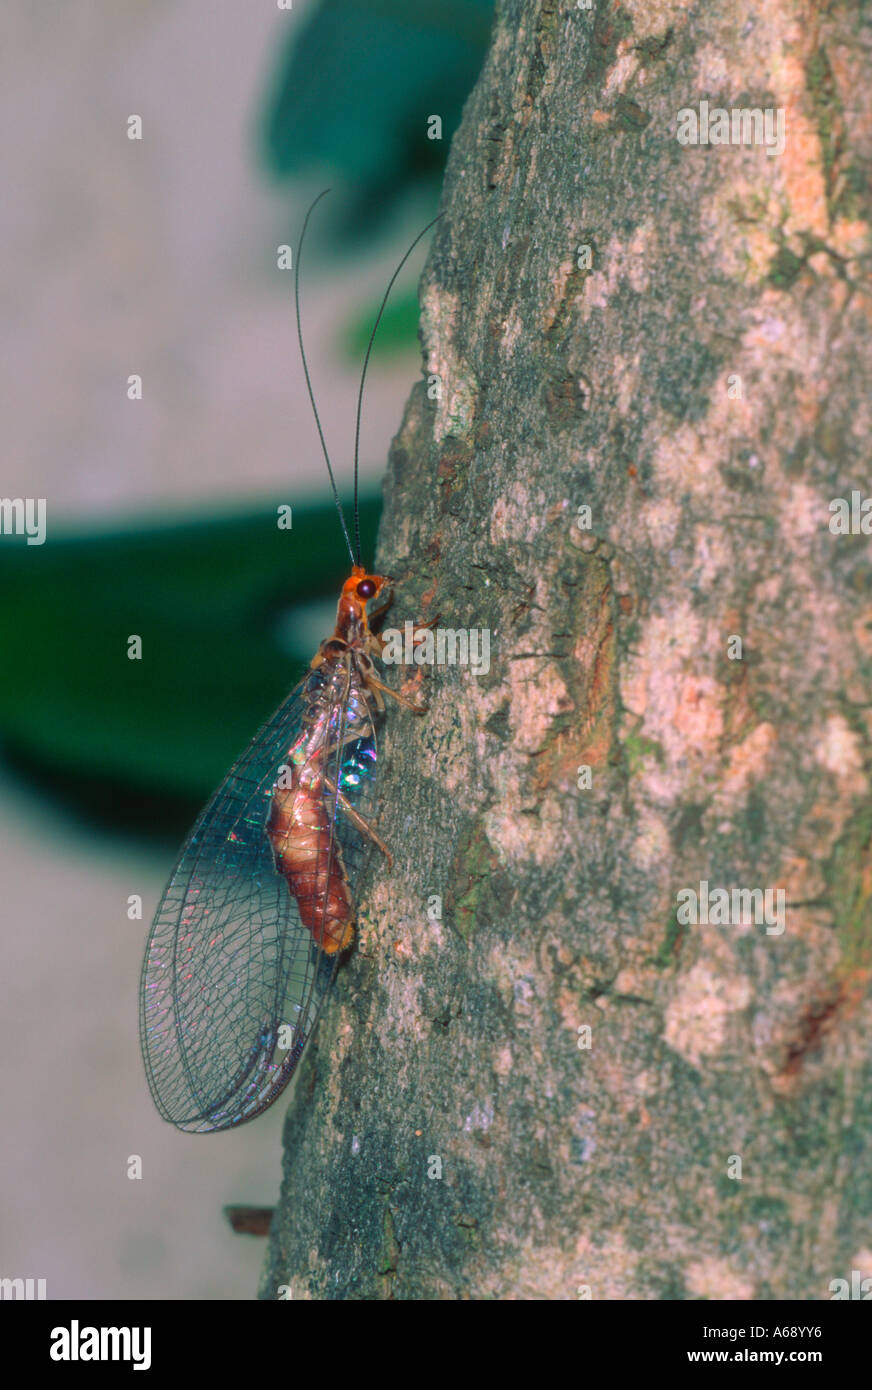 Lacewing, Nothochrysa sp. On tree trunk Stock Photo